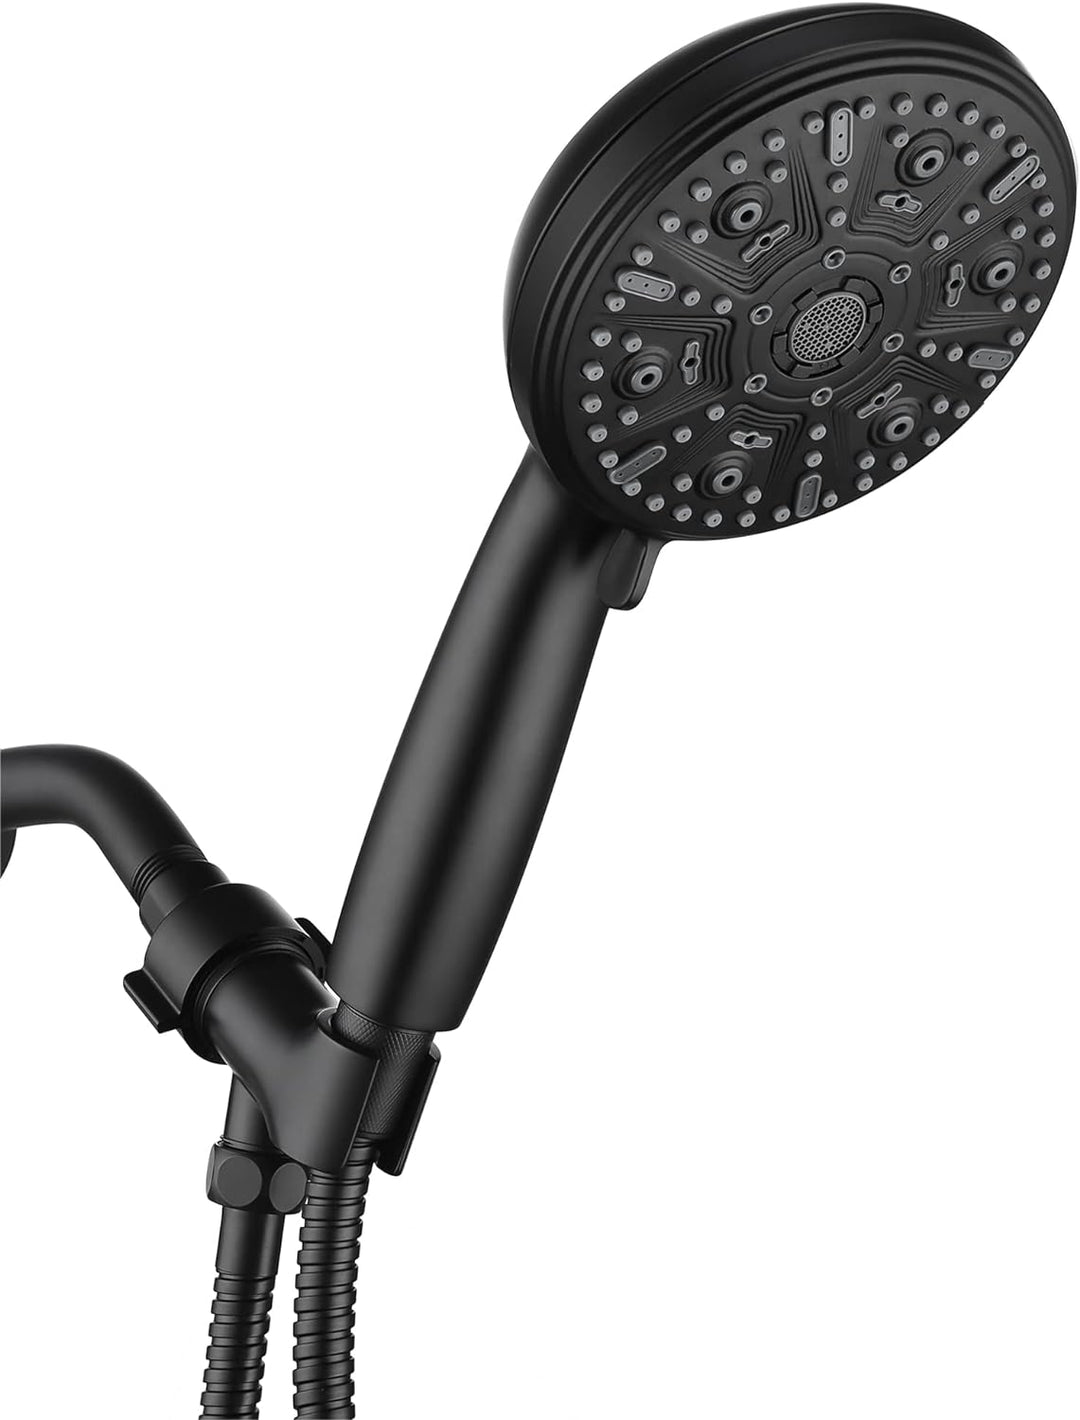 10 Functions Shower Head with Handheld，High Pressure Shower Heads Detachable Handheld Shower Head with Extra 59" Long Stainless Steel Hose and Adjustable Bracket-Easy Installation(Matte Black)